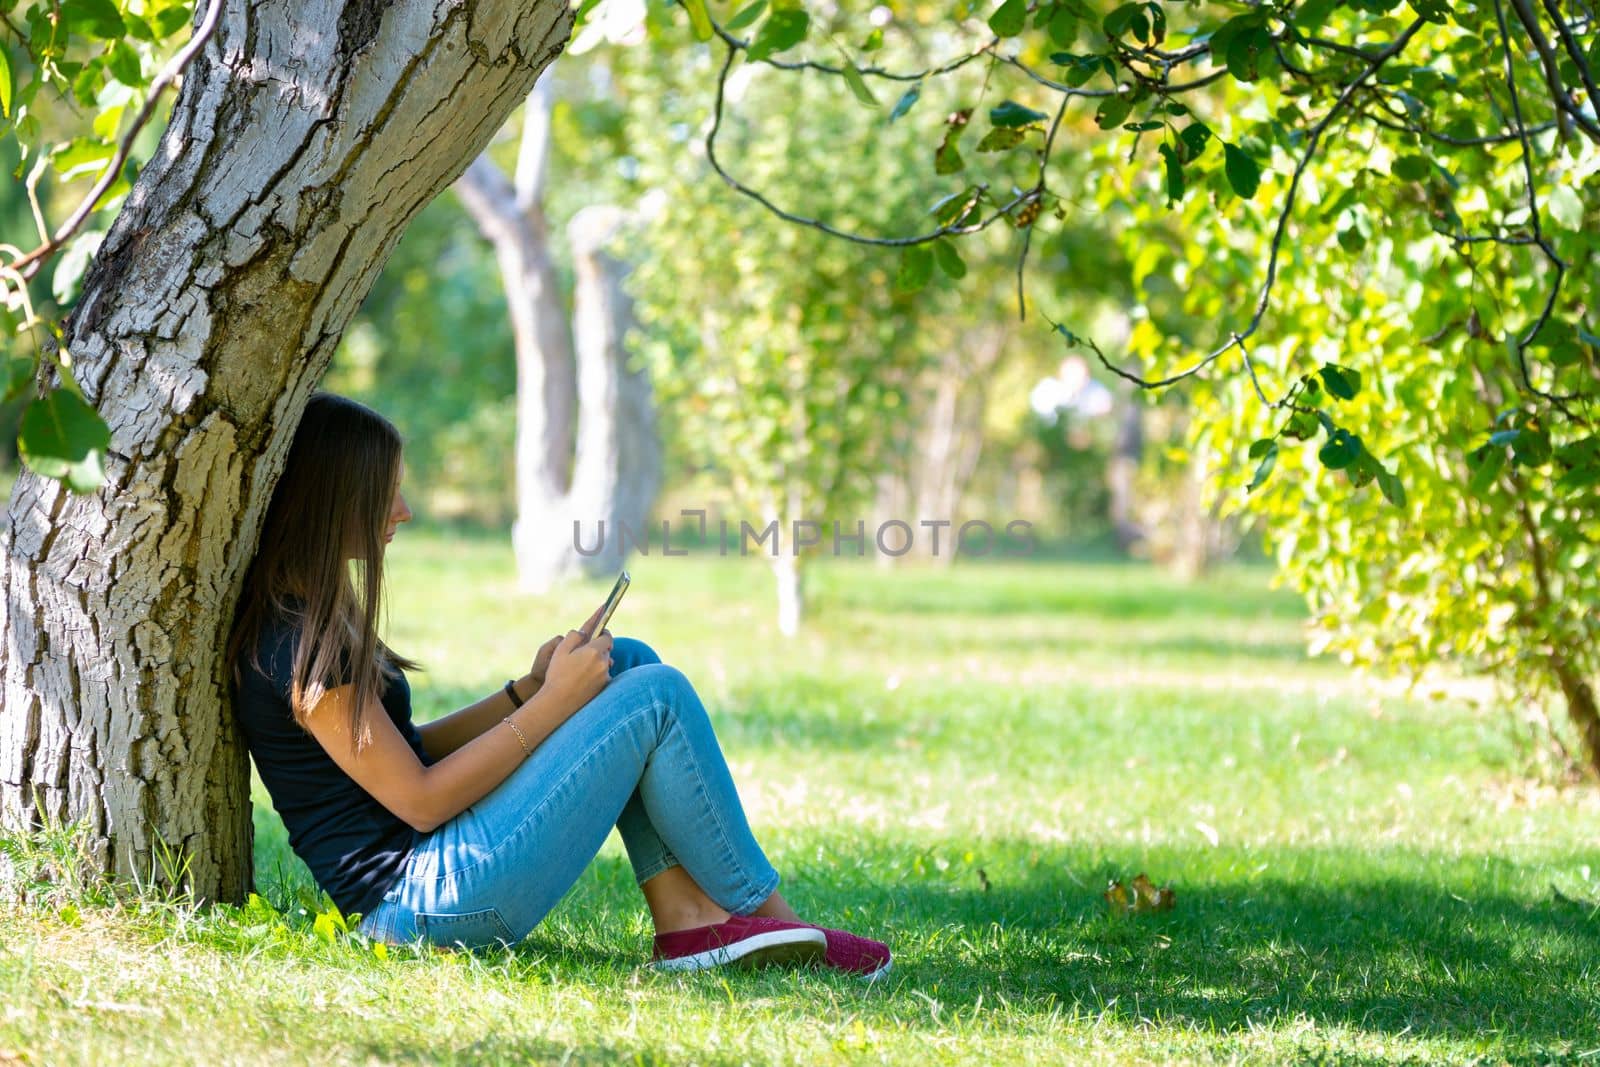 A girl sits under a tree in a sunny park and looks at the phone screen by Madhourse